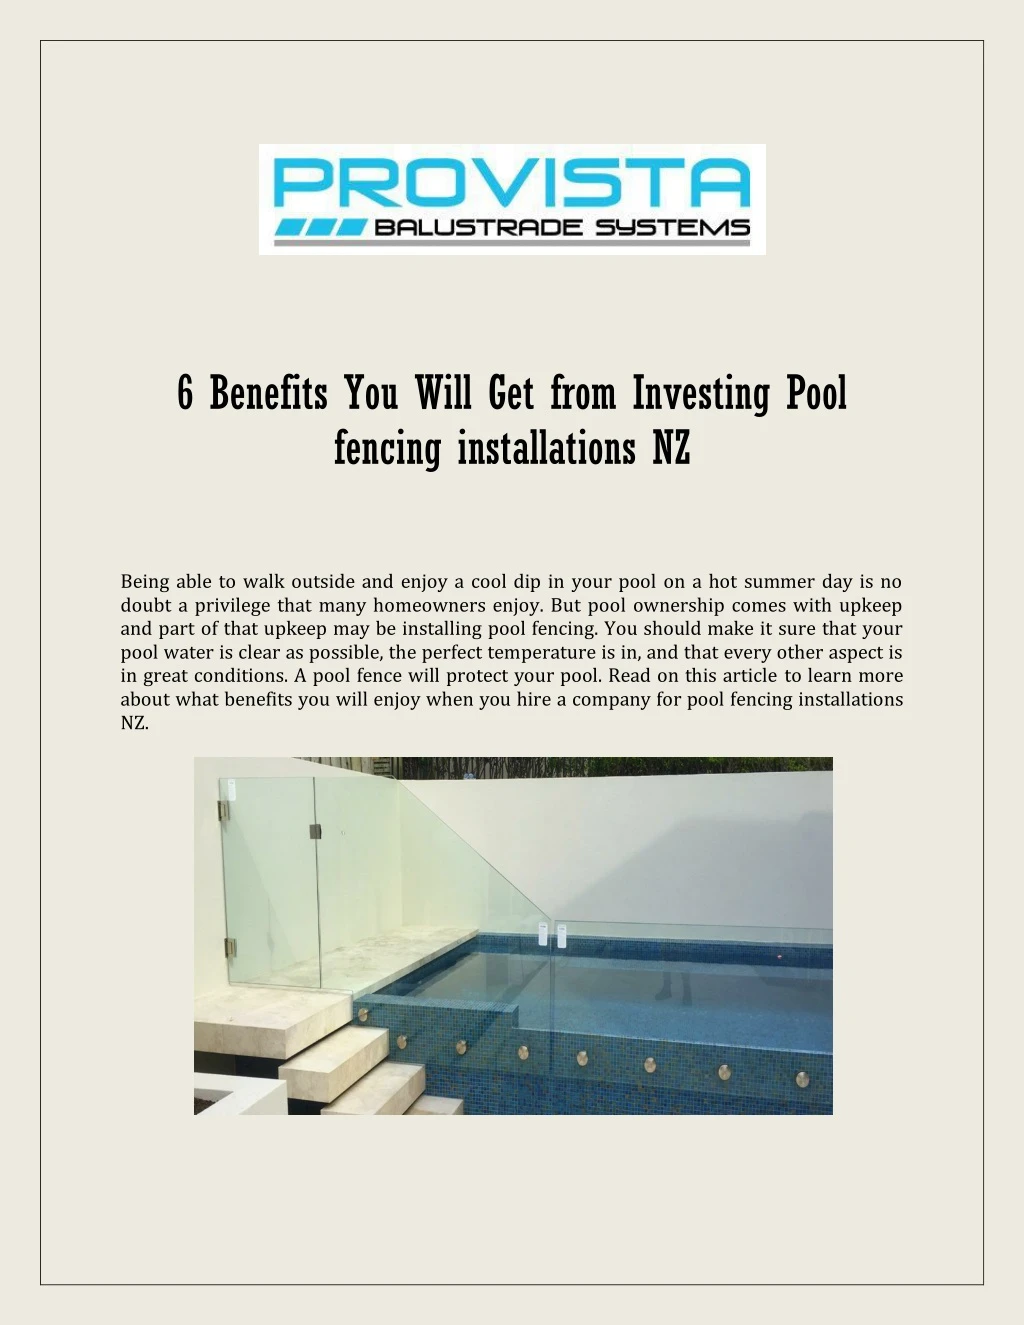 6 benefits you will get from investing pool